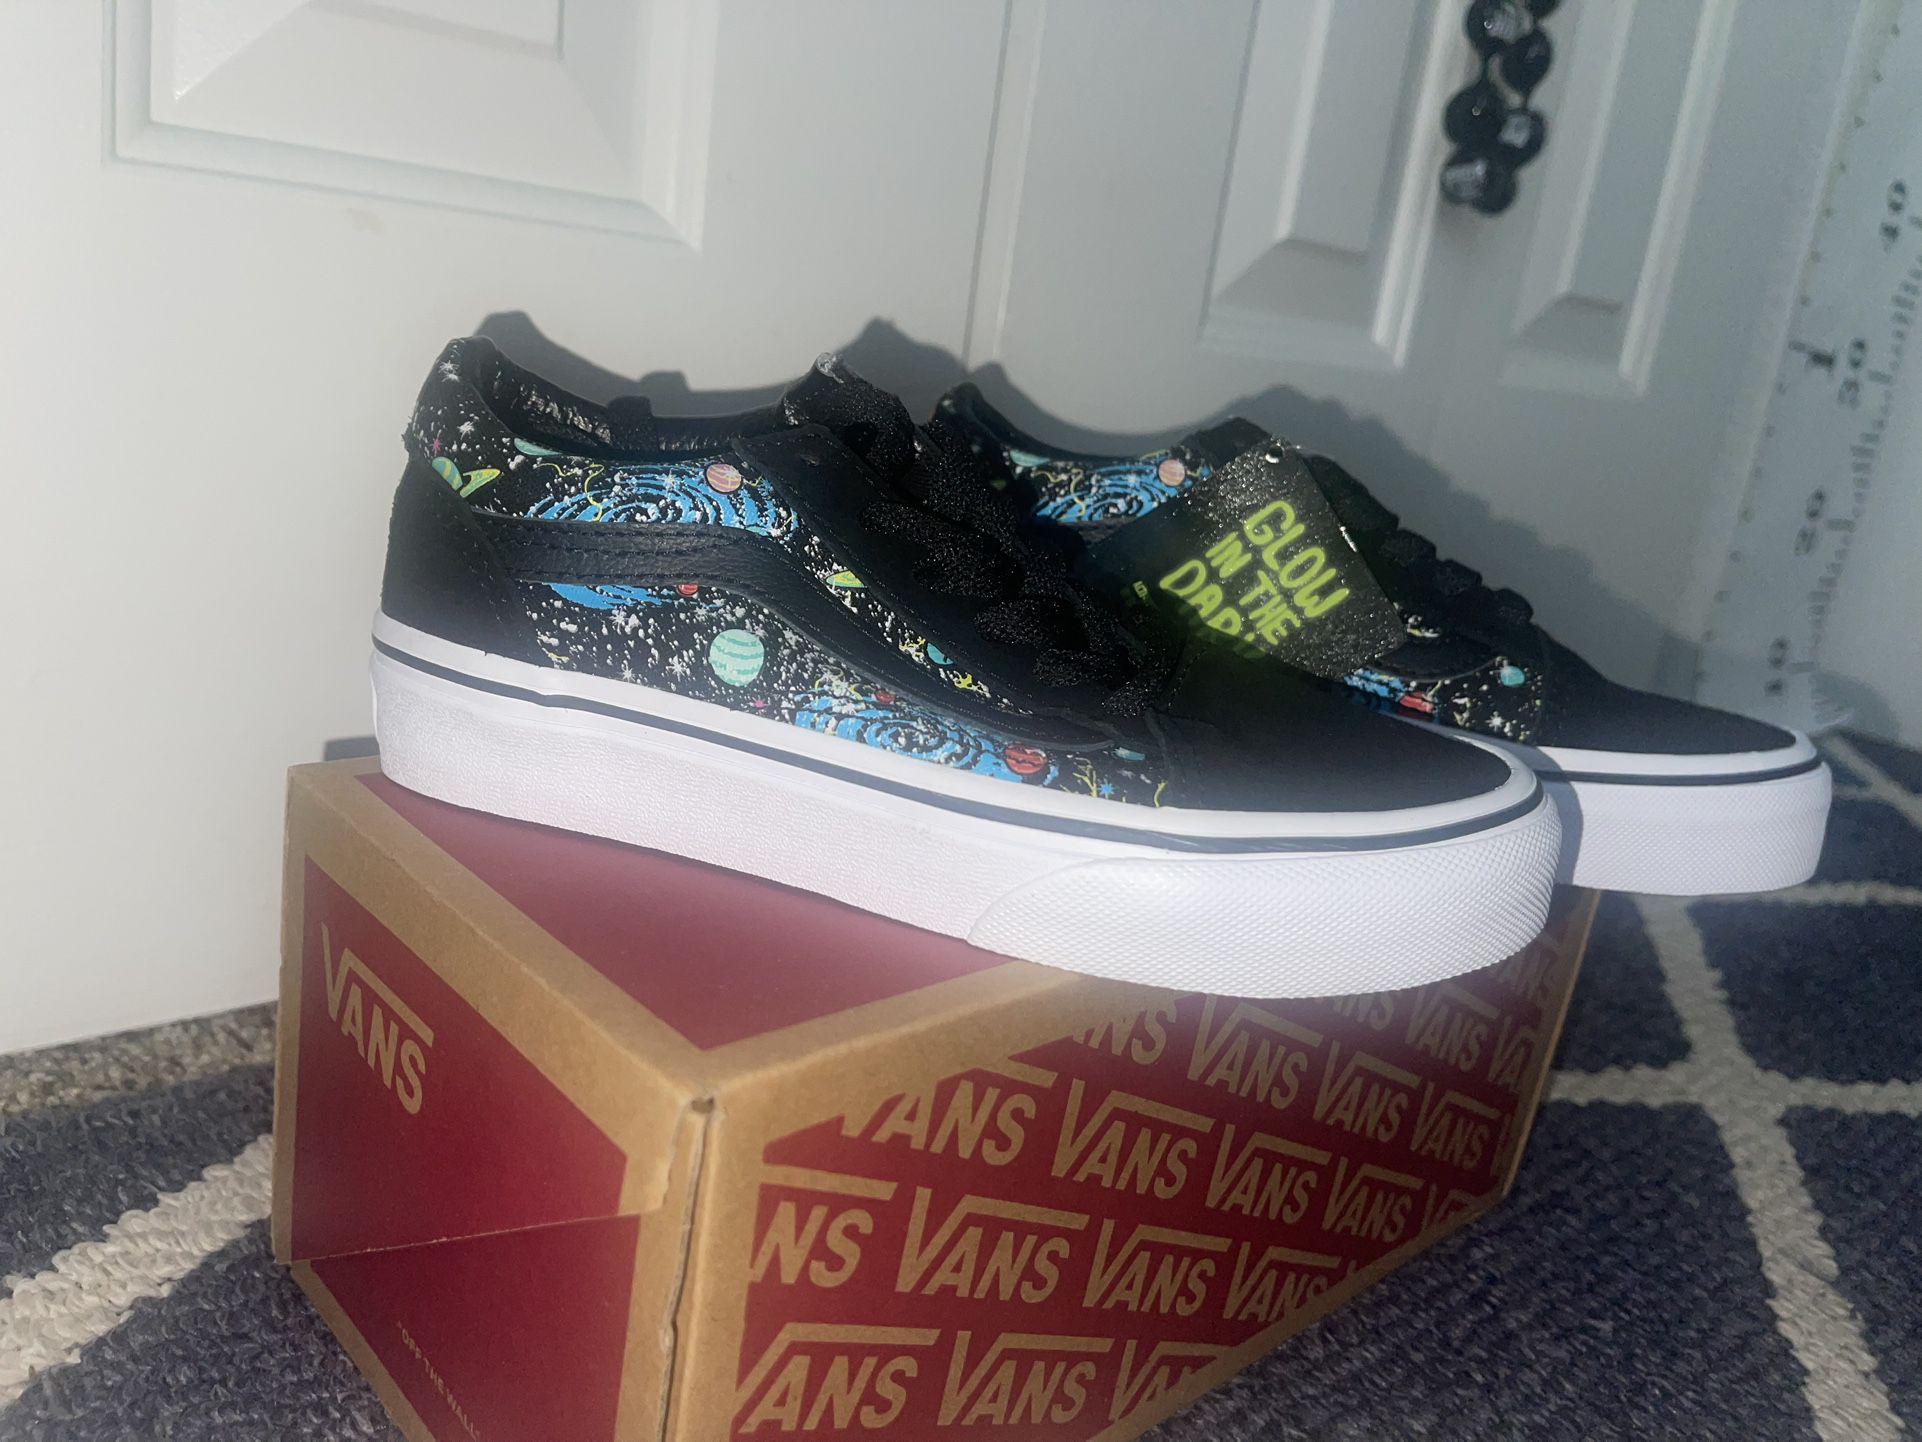 NEW GLOW IN THE DARK BOYS LOWTOP VANS SIZE 1 NEW